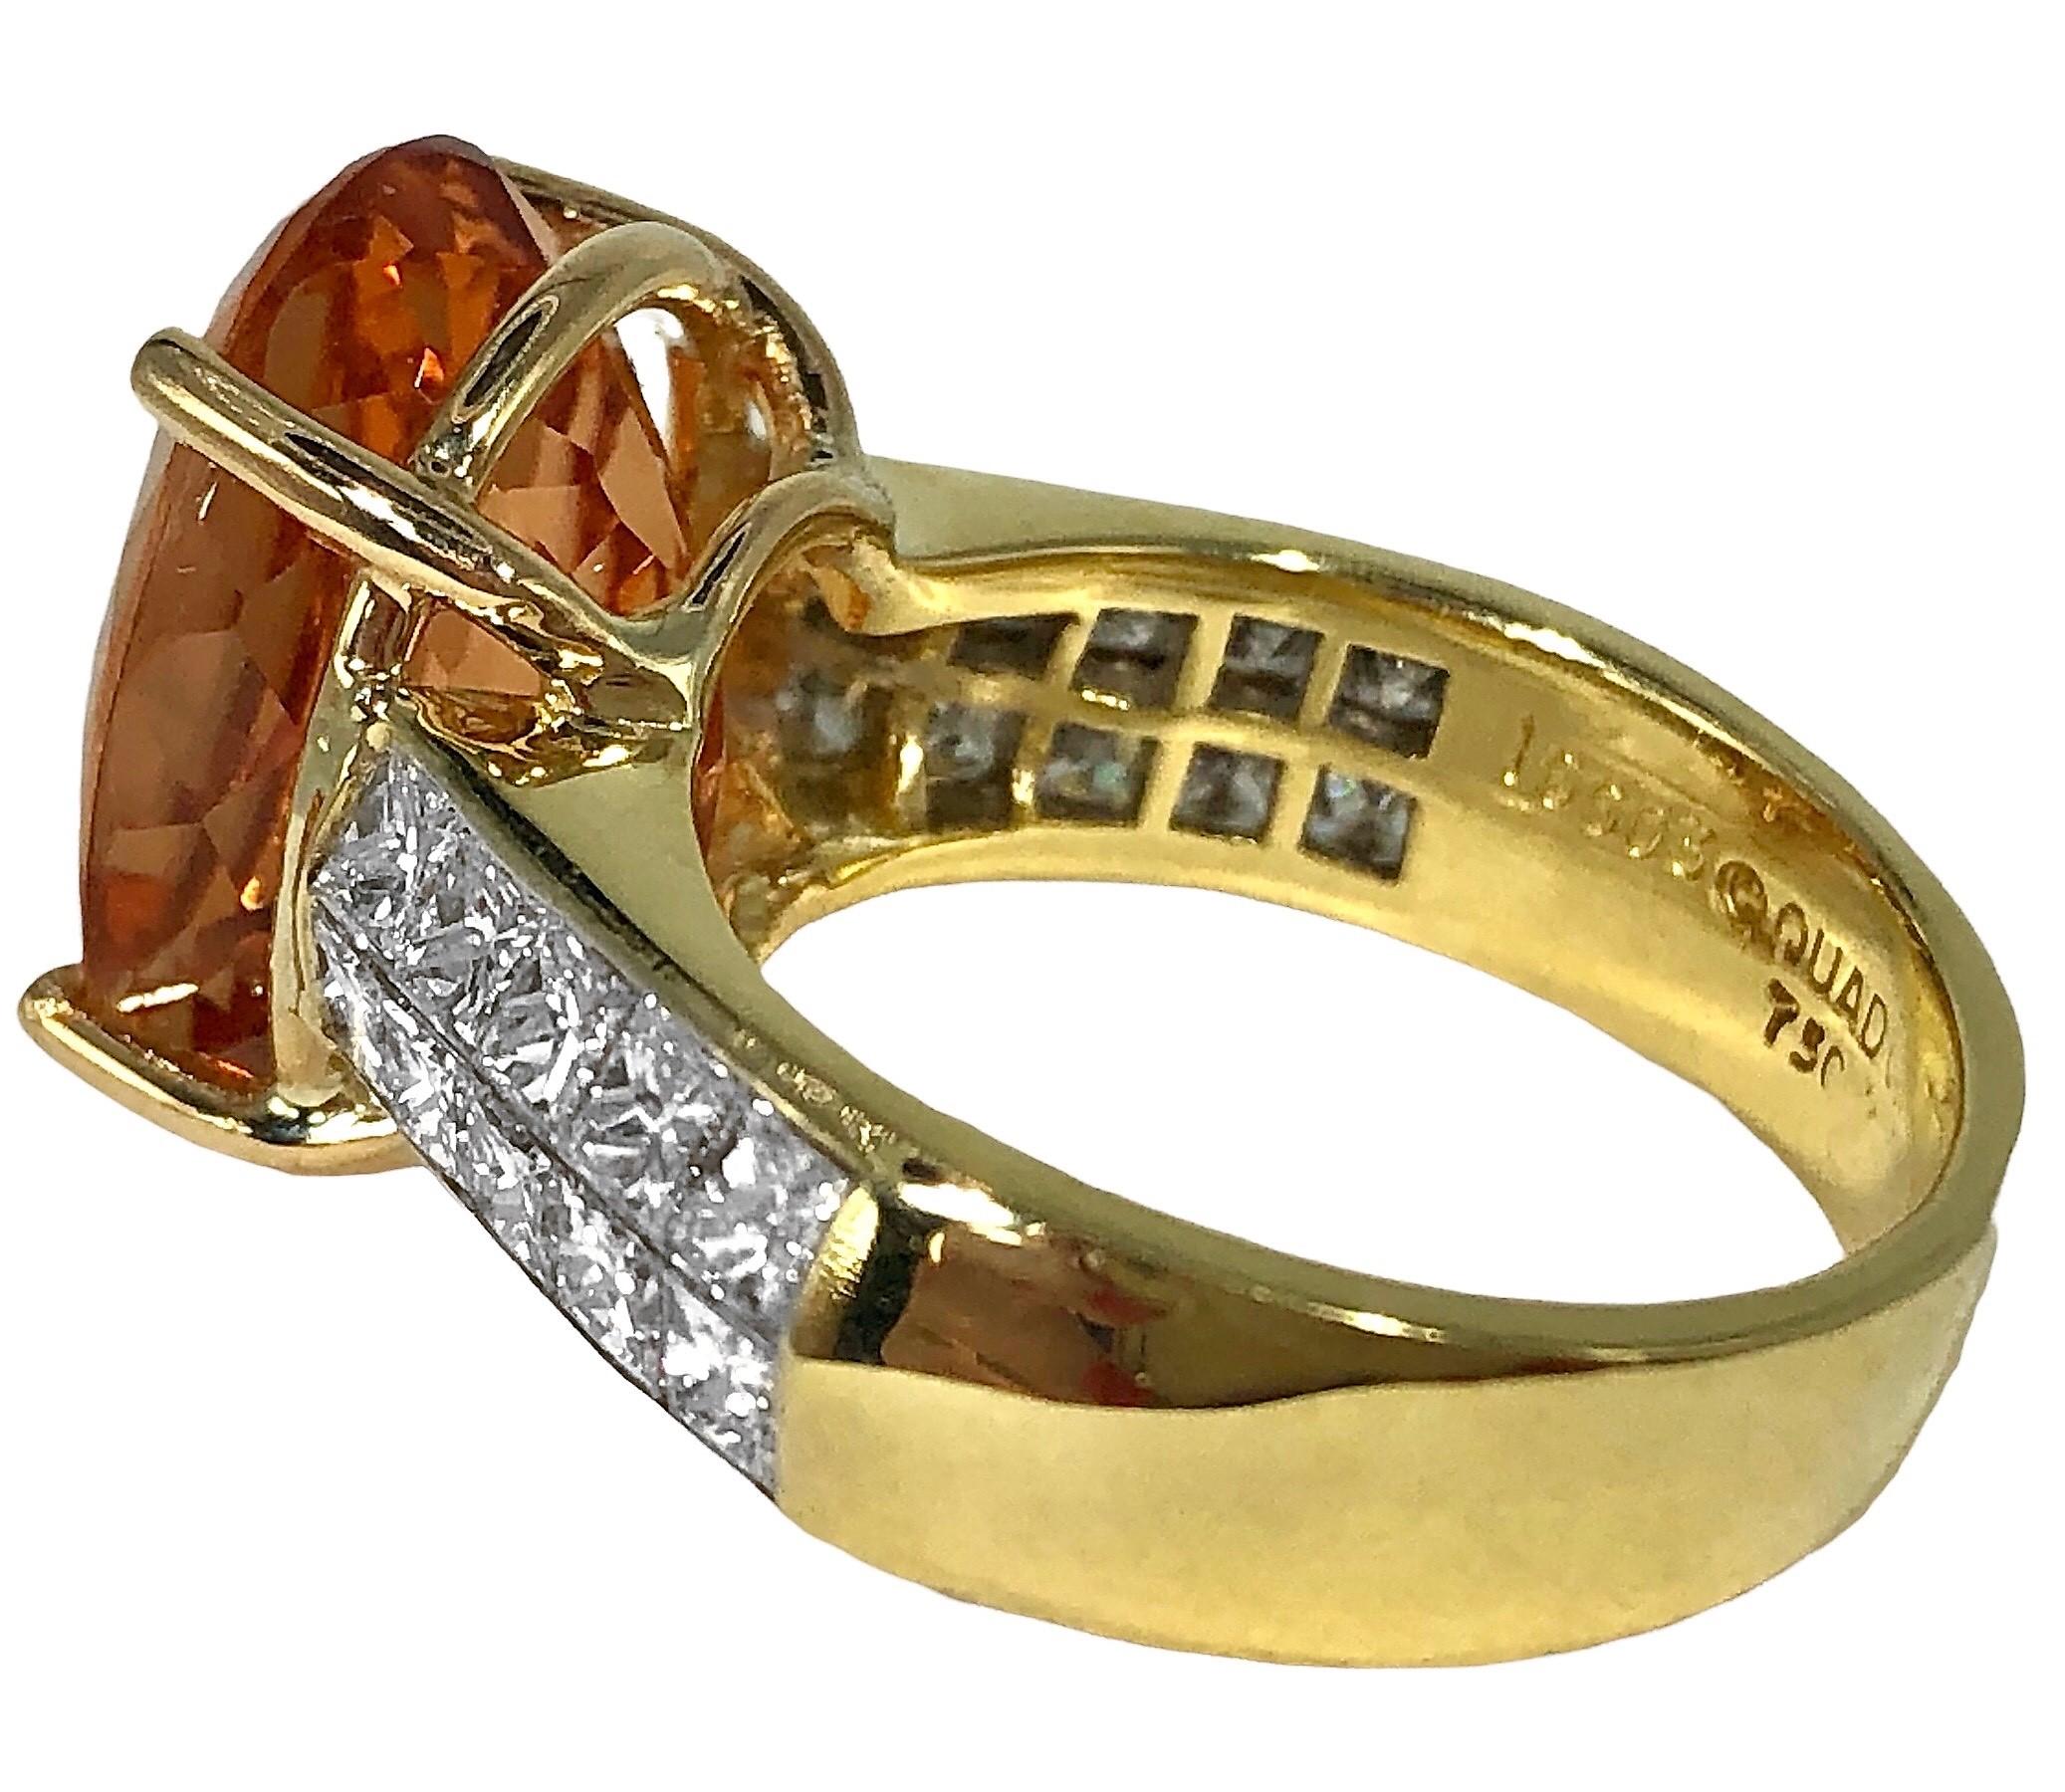 This 18k yellow gold fashion ring is a late 20th century industry icon, signed Quadrillion brand.  Set with one 10.82ct oval Imperial Topaz* flanked by twenty quadrillion cut diamonds on the ring's shoulders. The vivid golden-orange color of the